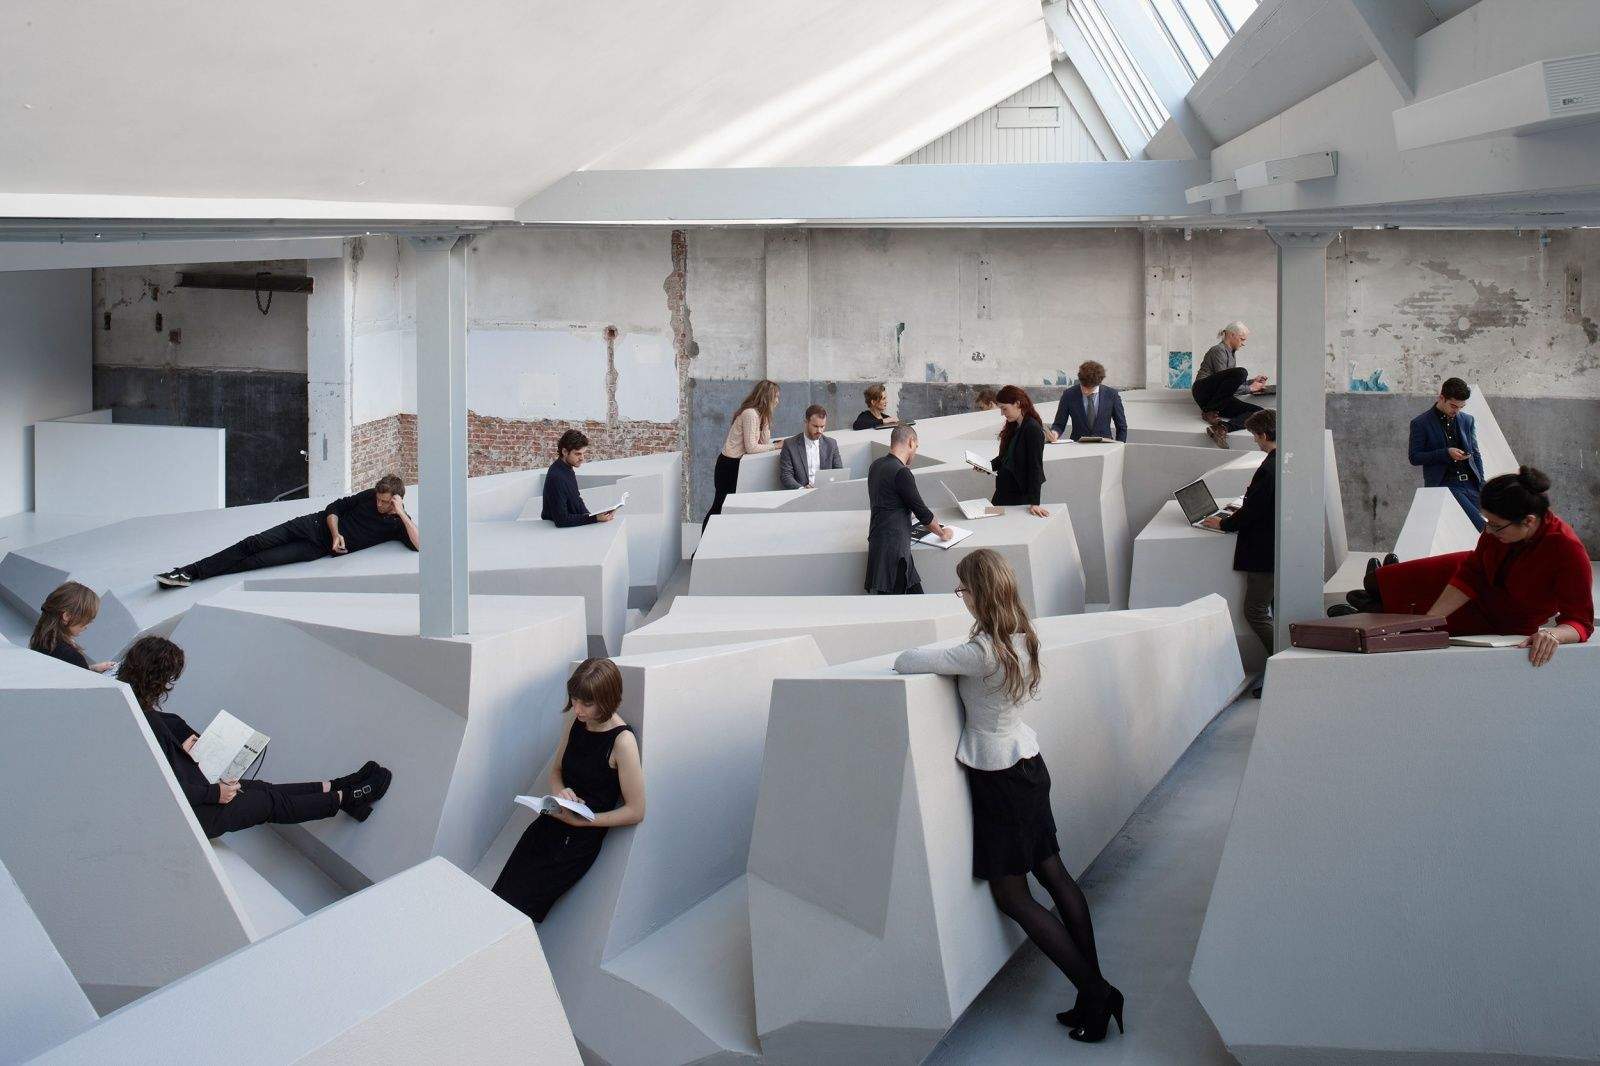 No chairs exist in the office re-imagined by artist Barbara Visser and architects Erik and Ronald Rietveld. Photo by Jan Kempenaers